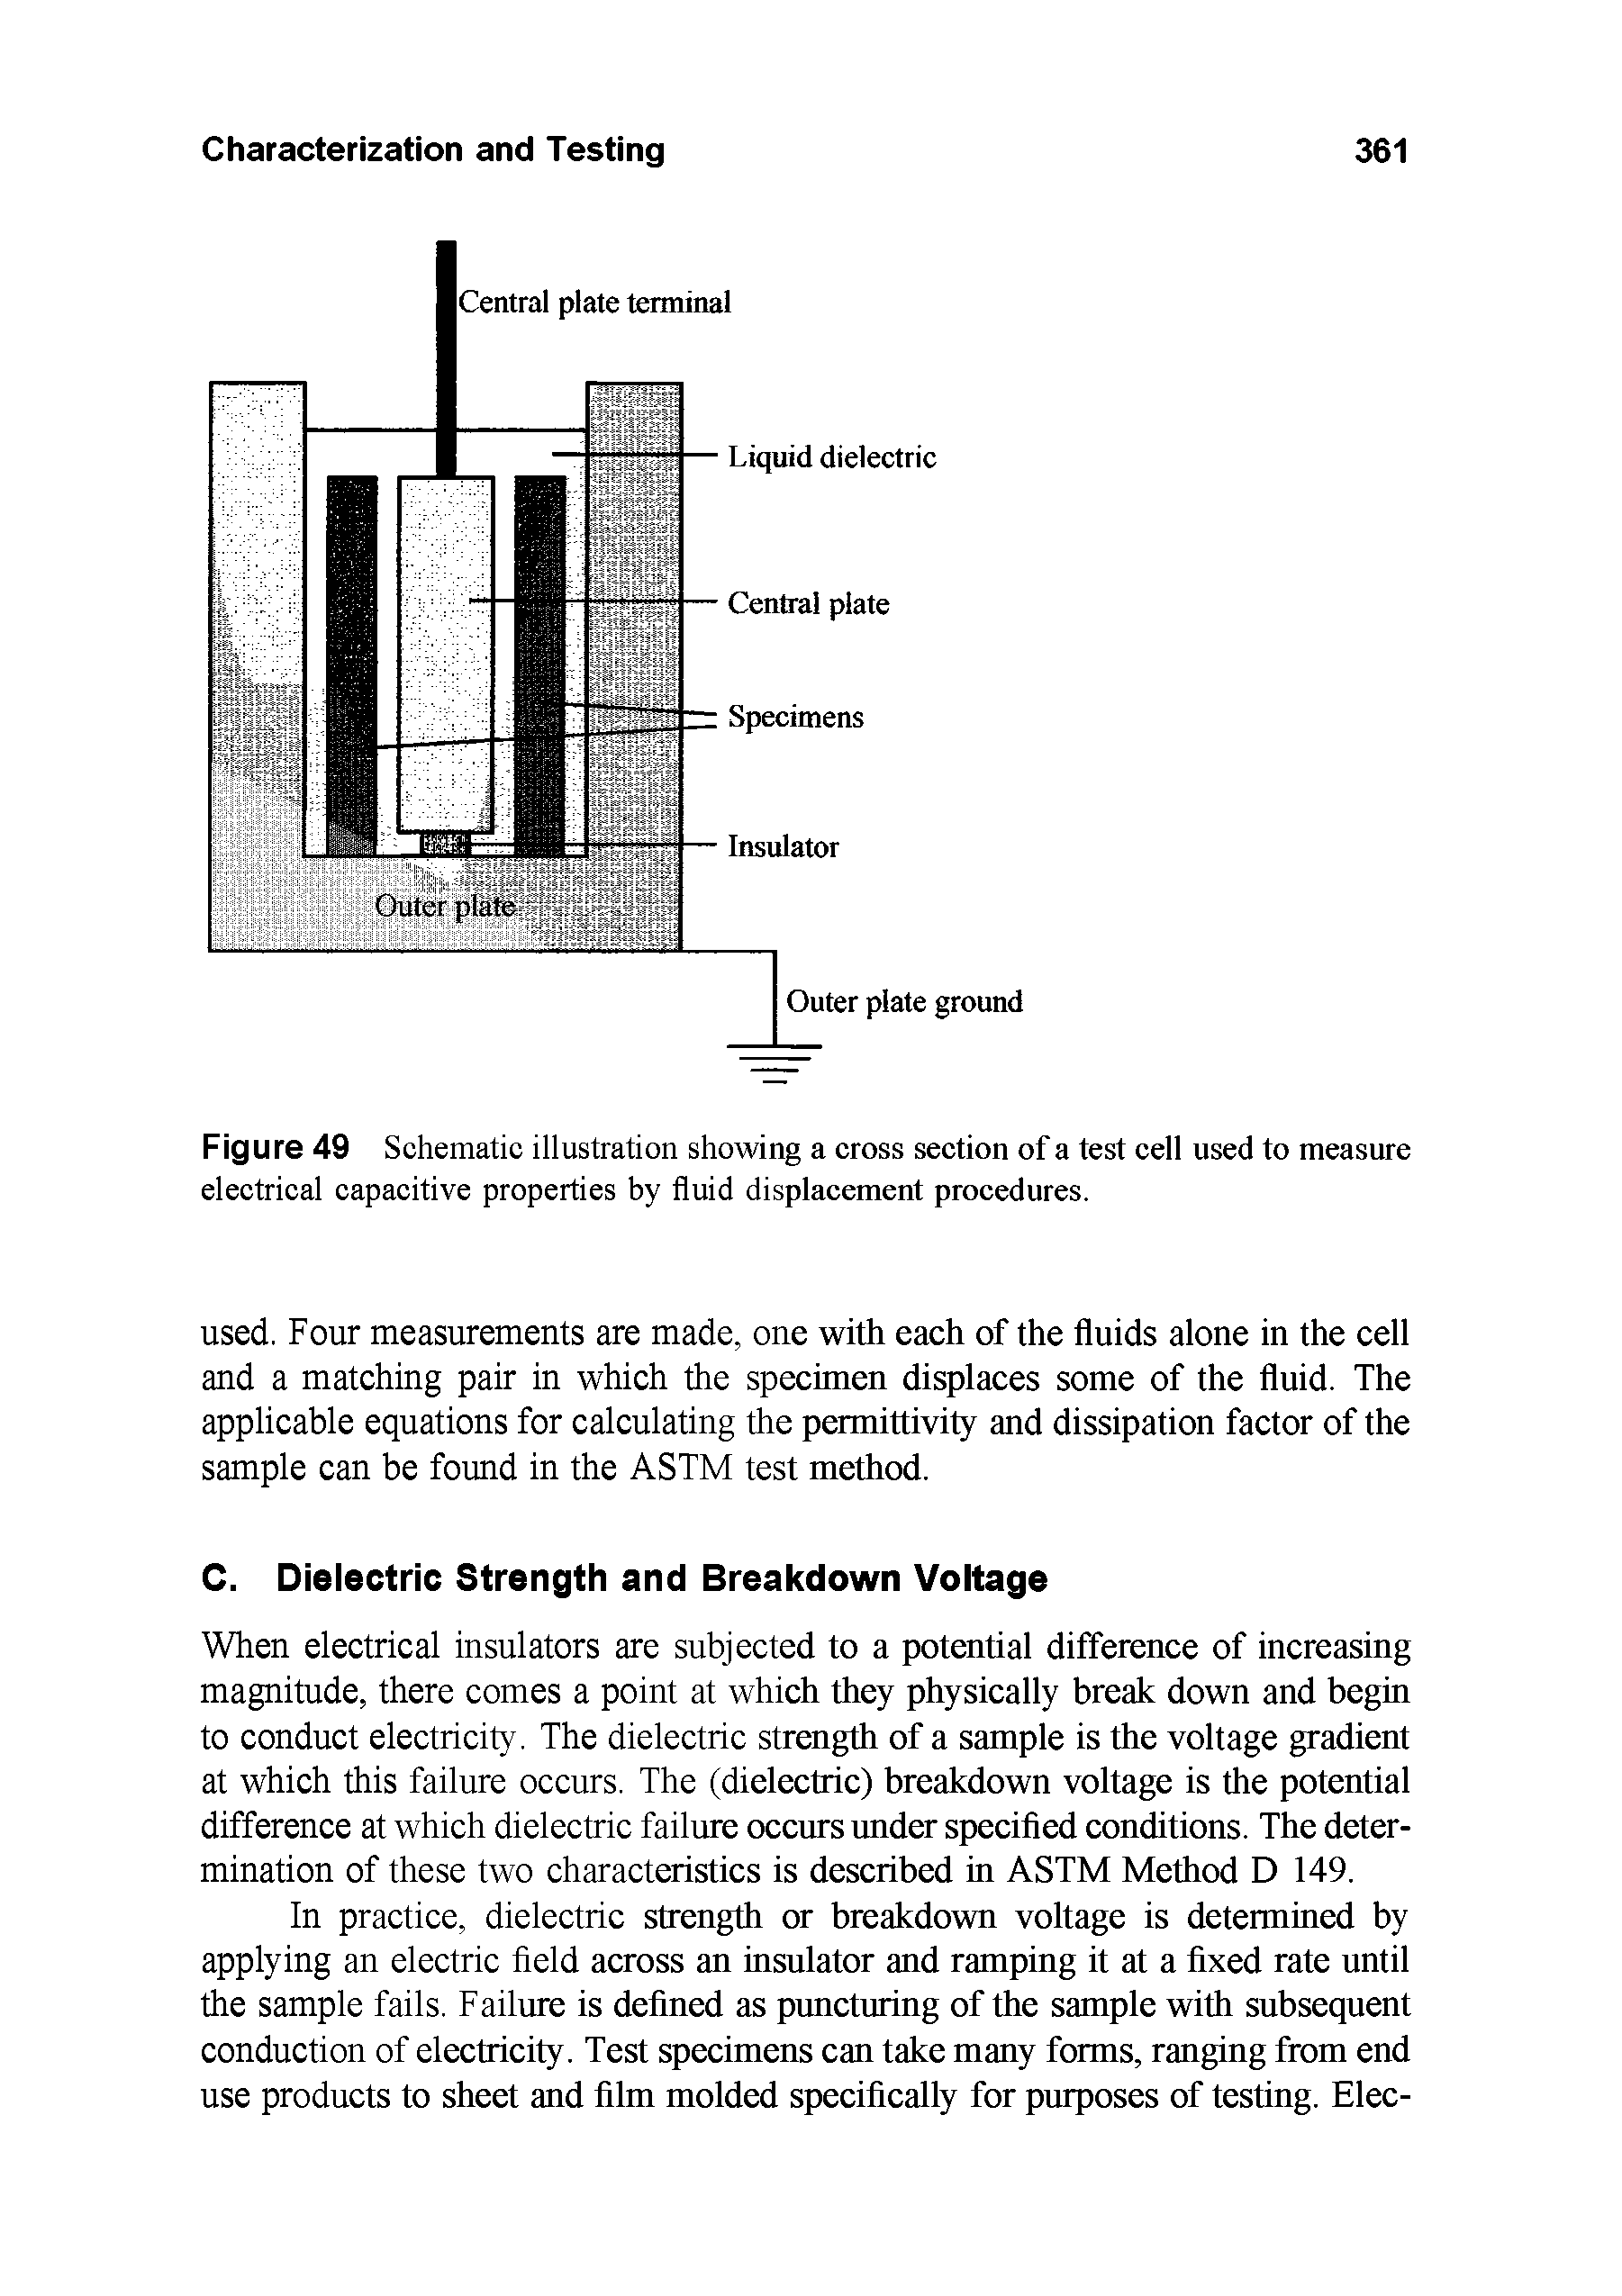 Figure 49 Schematic illustration showing a cross section of a test cell used to measure electrical capacitive properties by fluid displacement procedures.